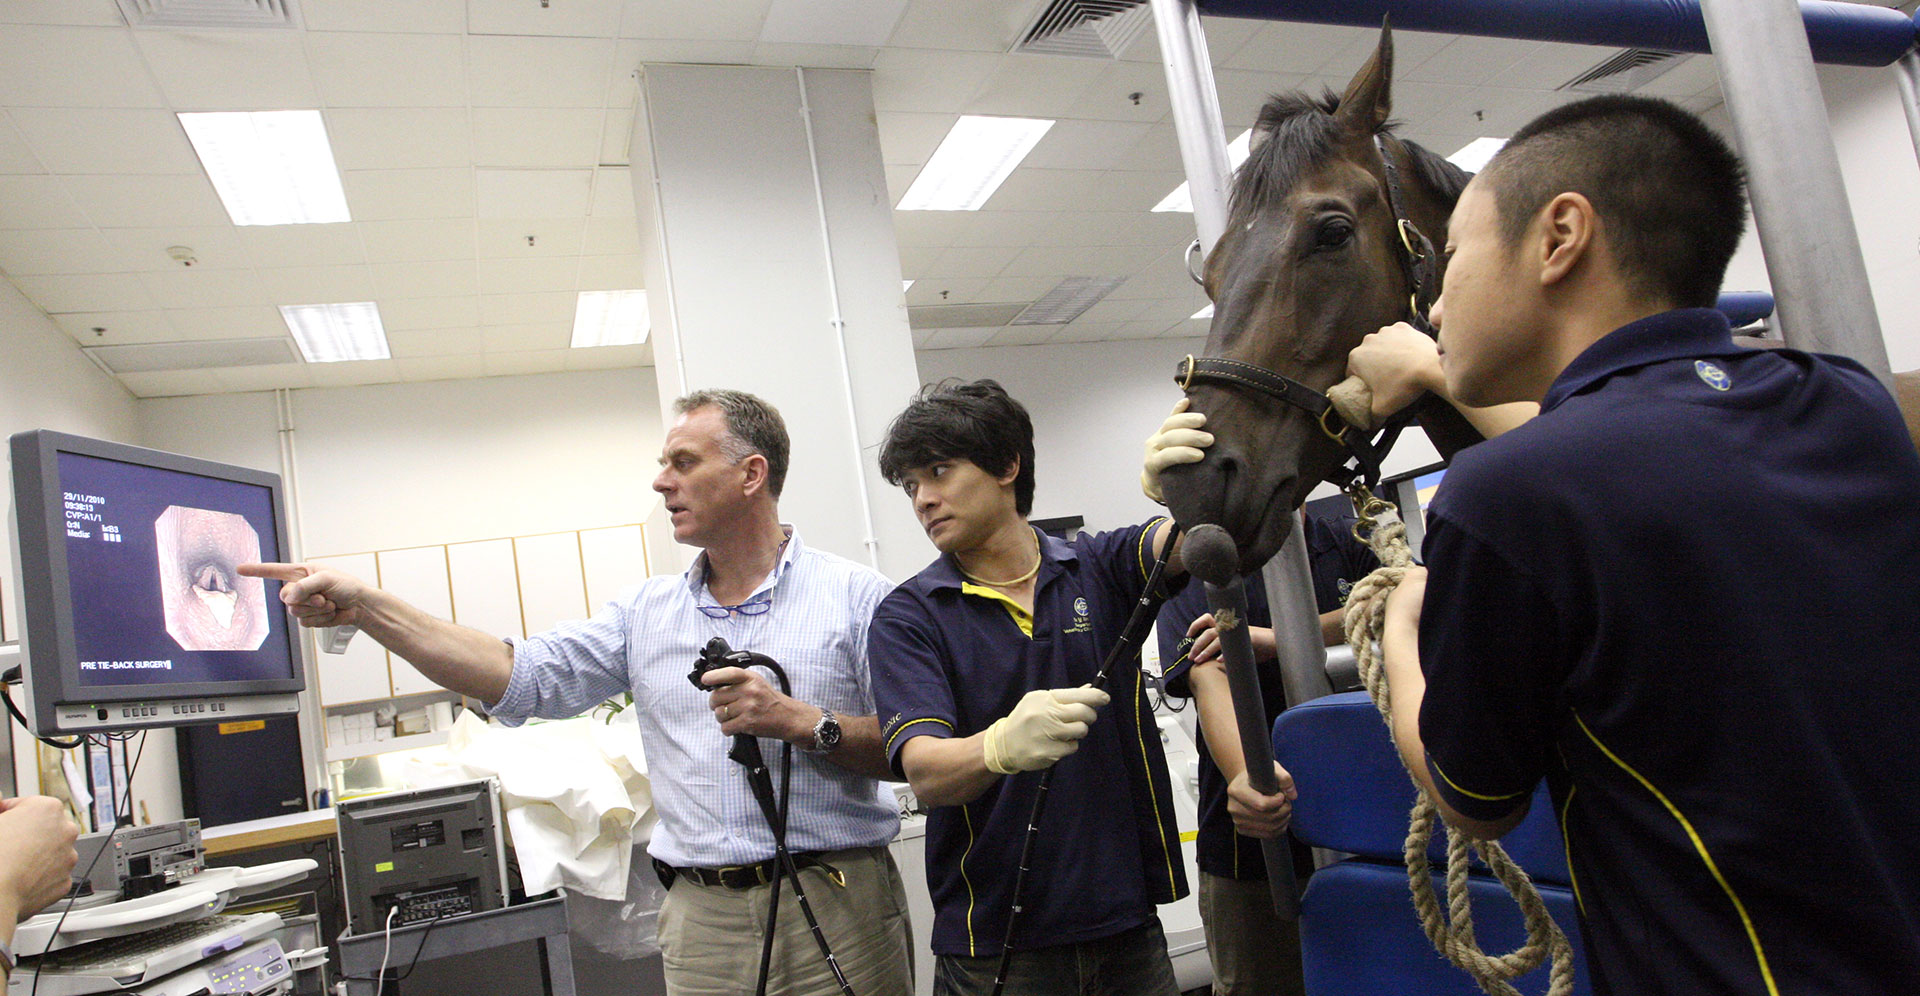 Scientists and veterinary surgeons can learn more about the needs of horses through scientific research.